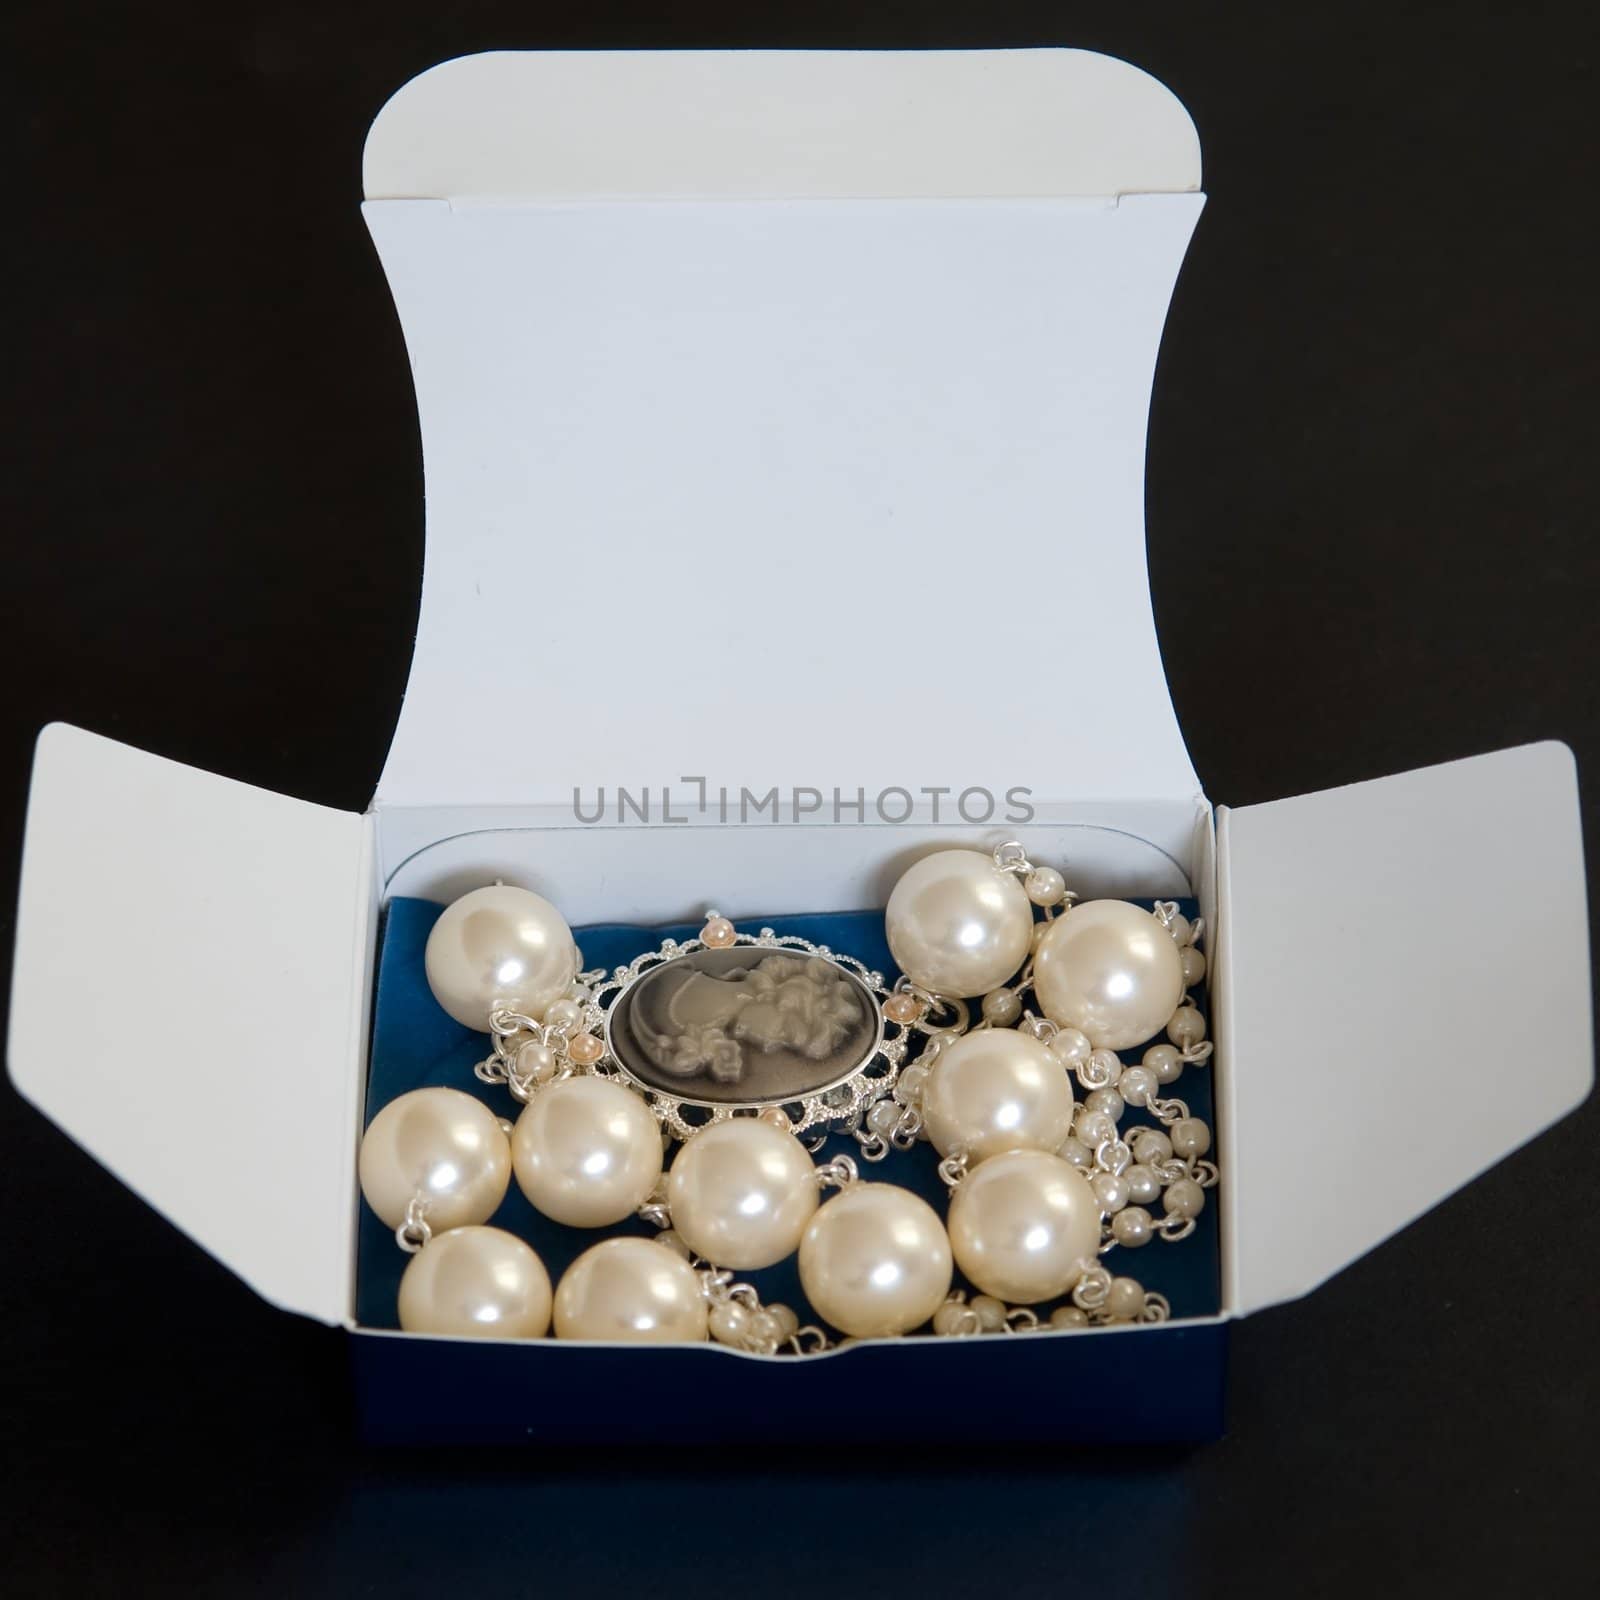 Beautiful necklace in a box on a black background